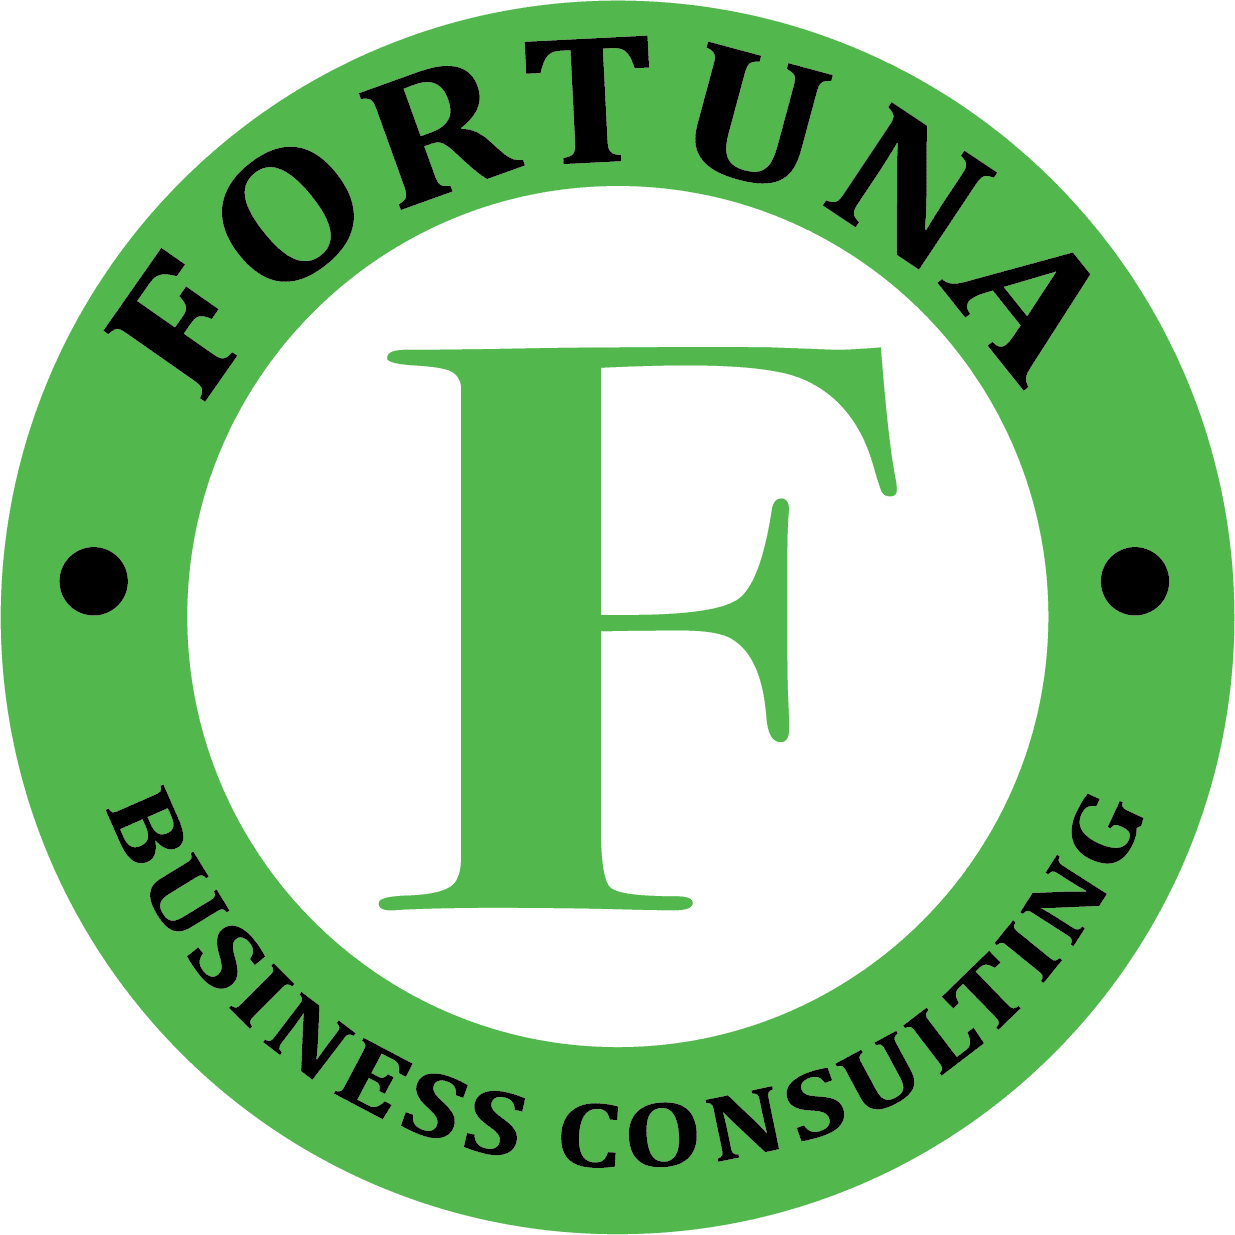 Fortuna Business Consulting